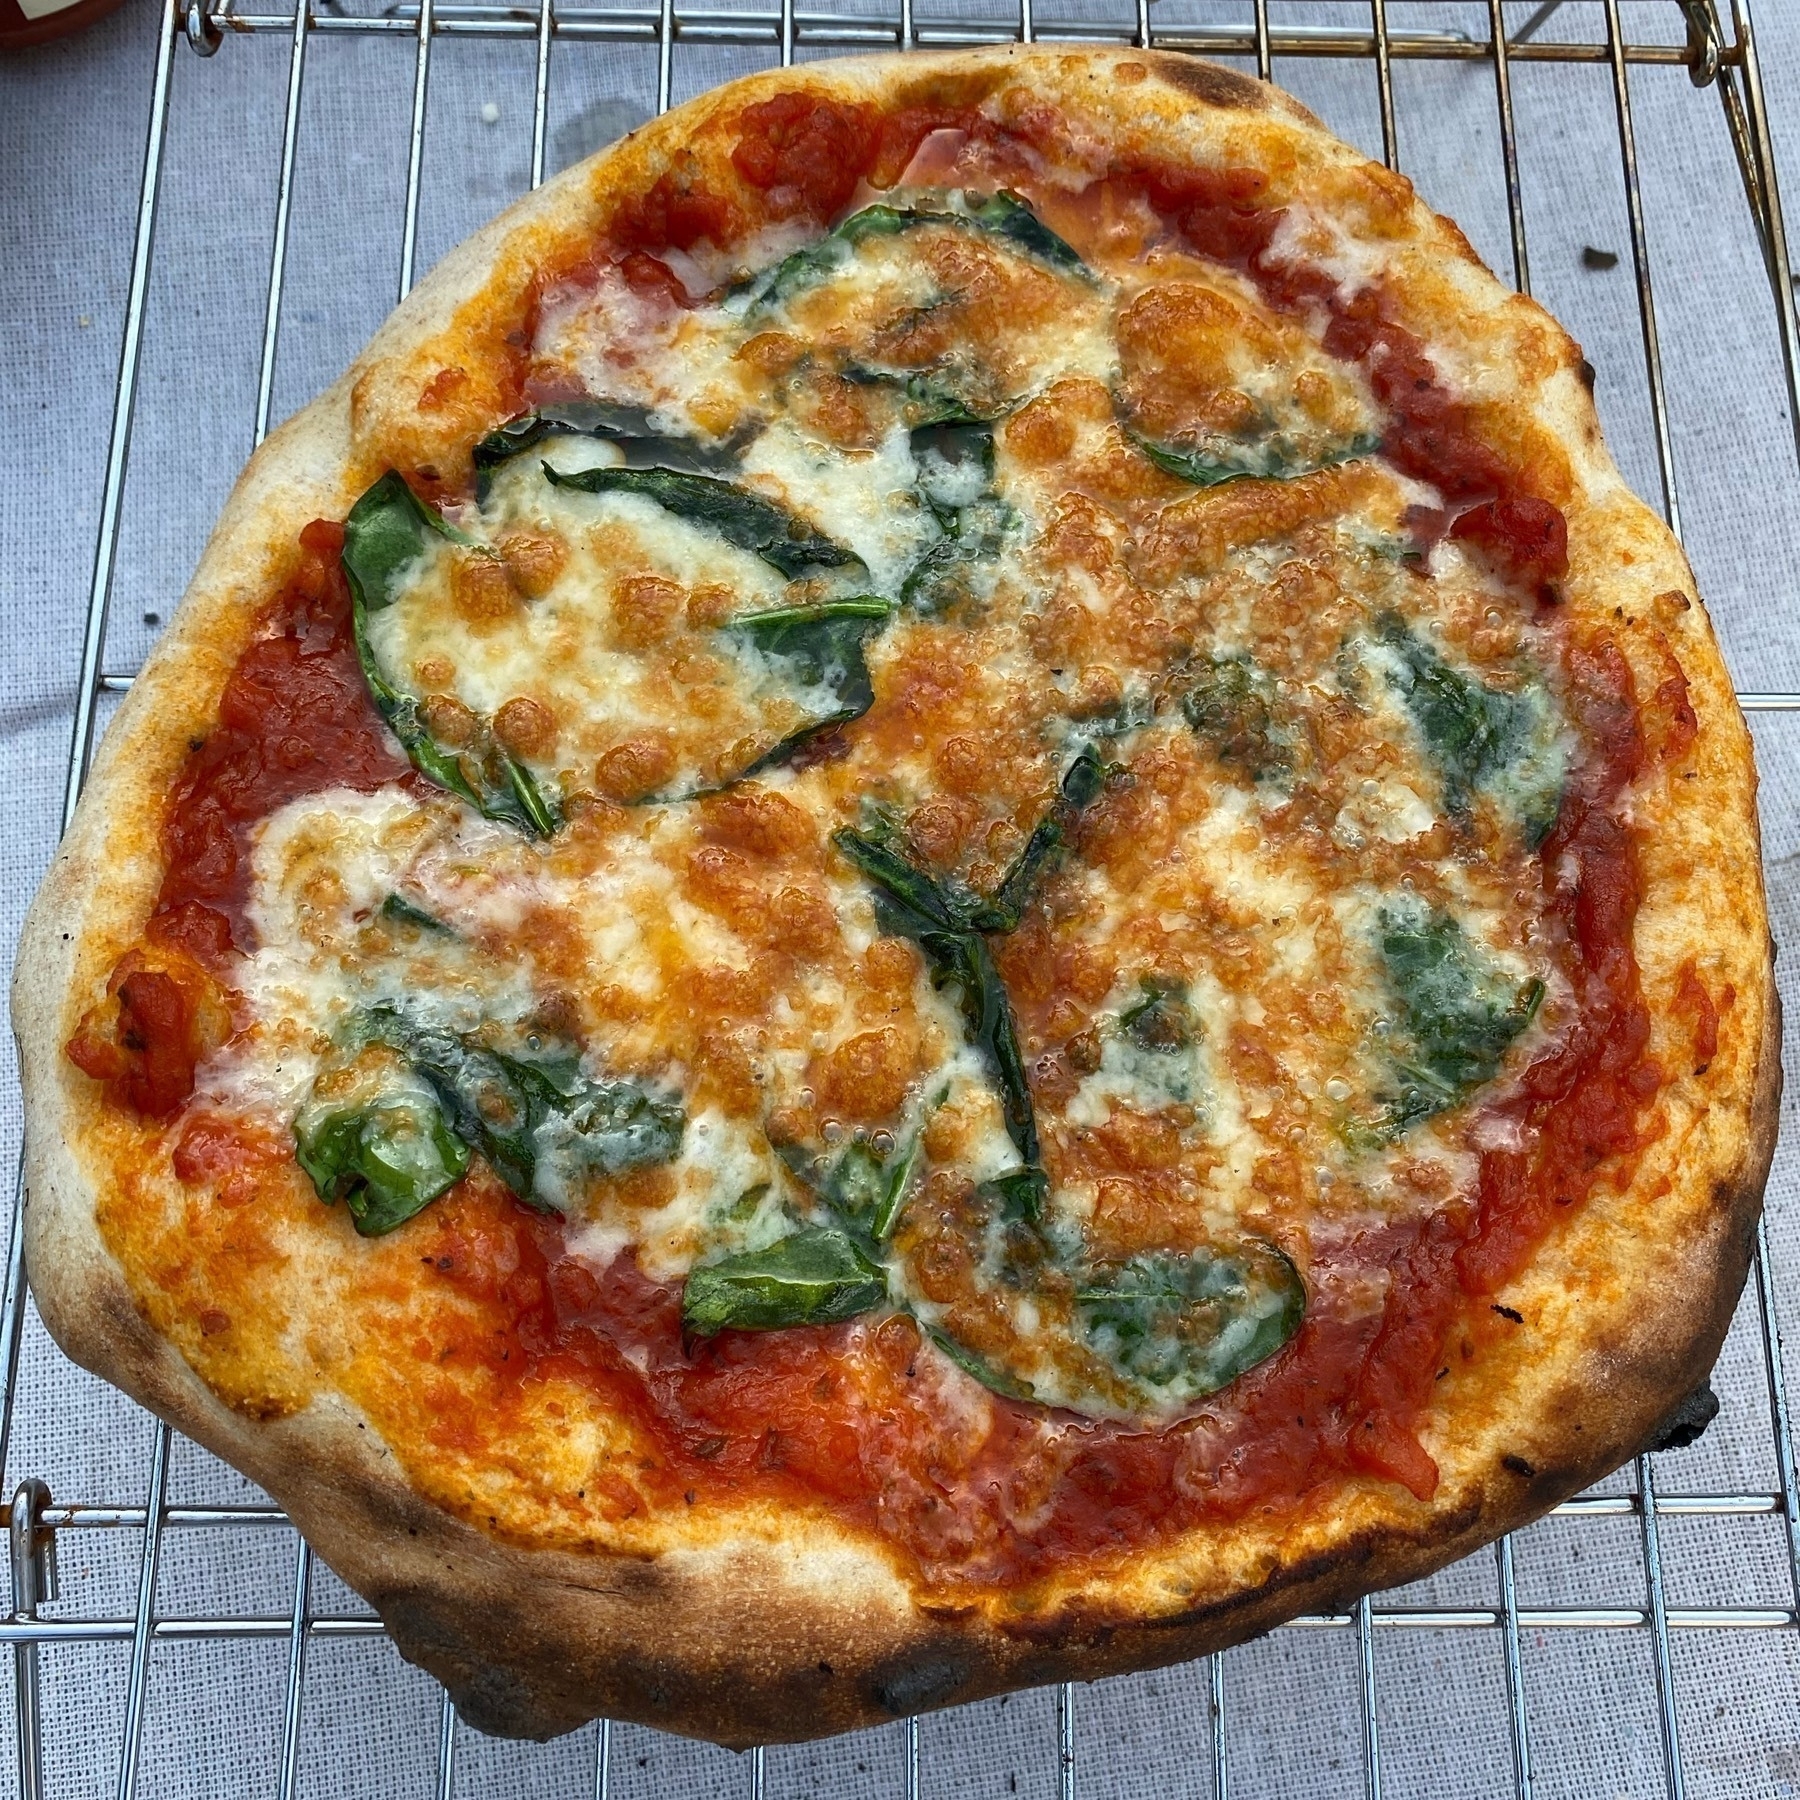 Small pizza on a cooling rack